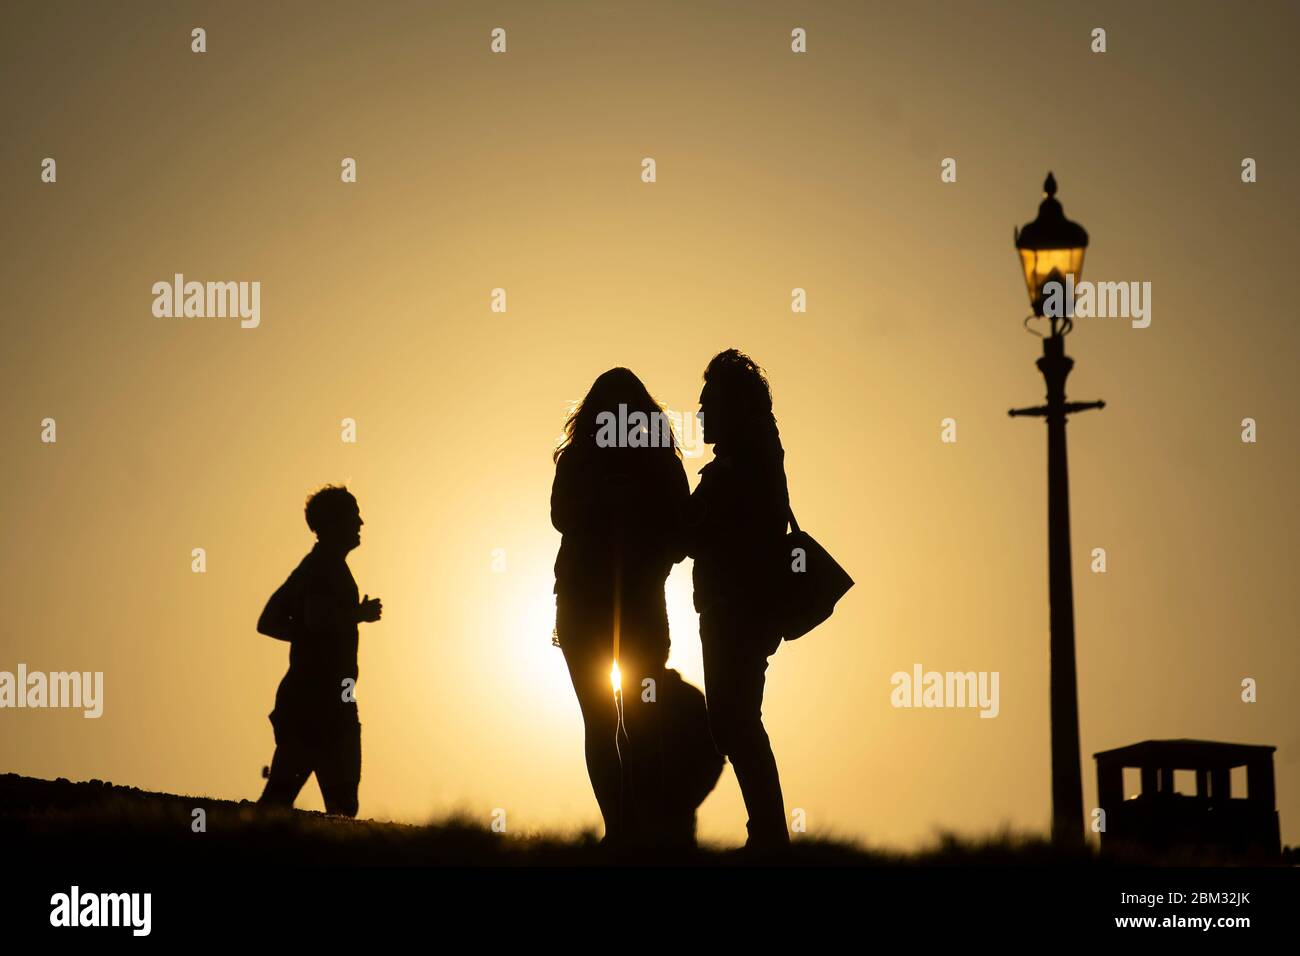 People wait for the moon to rise over Primrose Hill in central London, ahead of the final supermoon of the year, which will be visible over the UK on Thursday evening. The full moon in May is also known as the 'flower moon', signifying the flowers that bloom during the month. Stock Photo